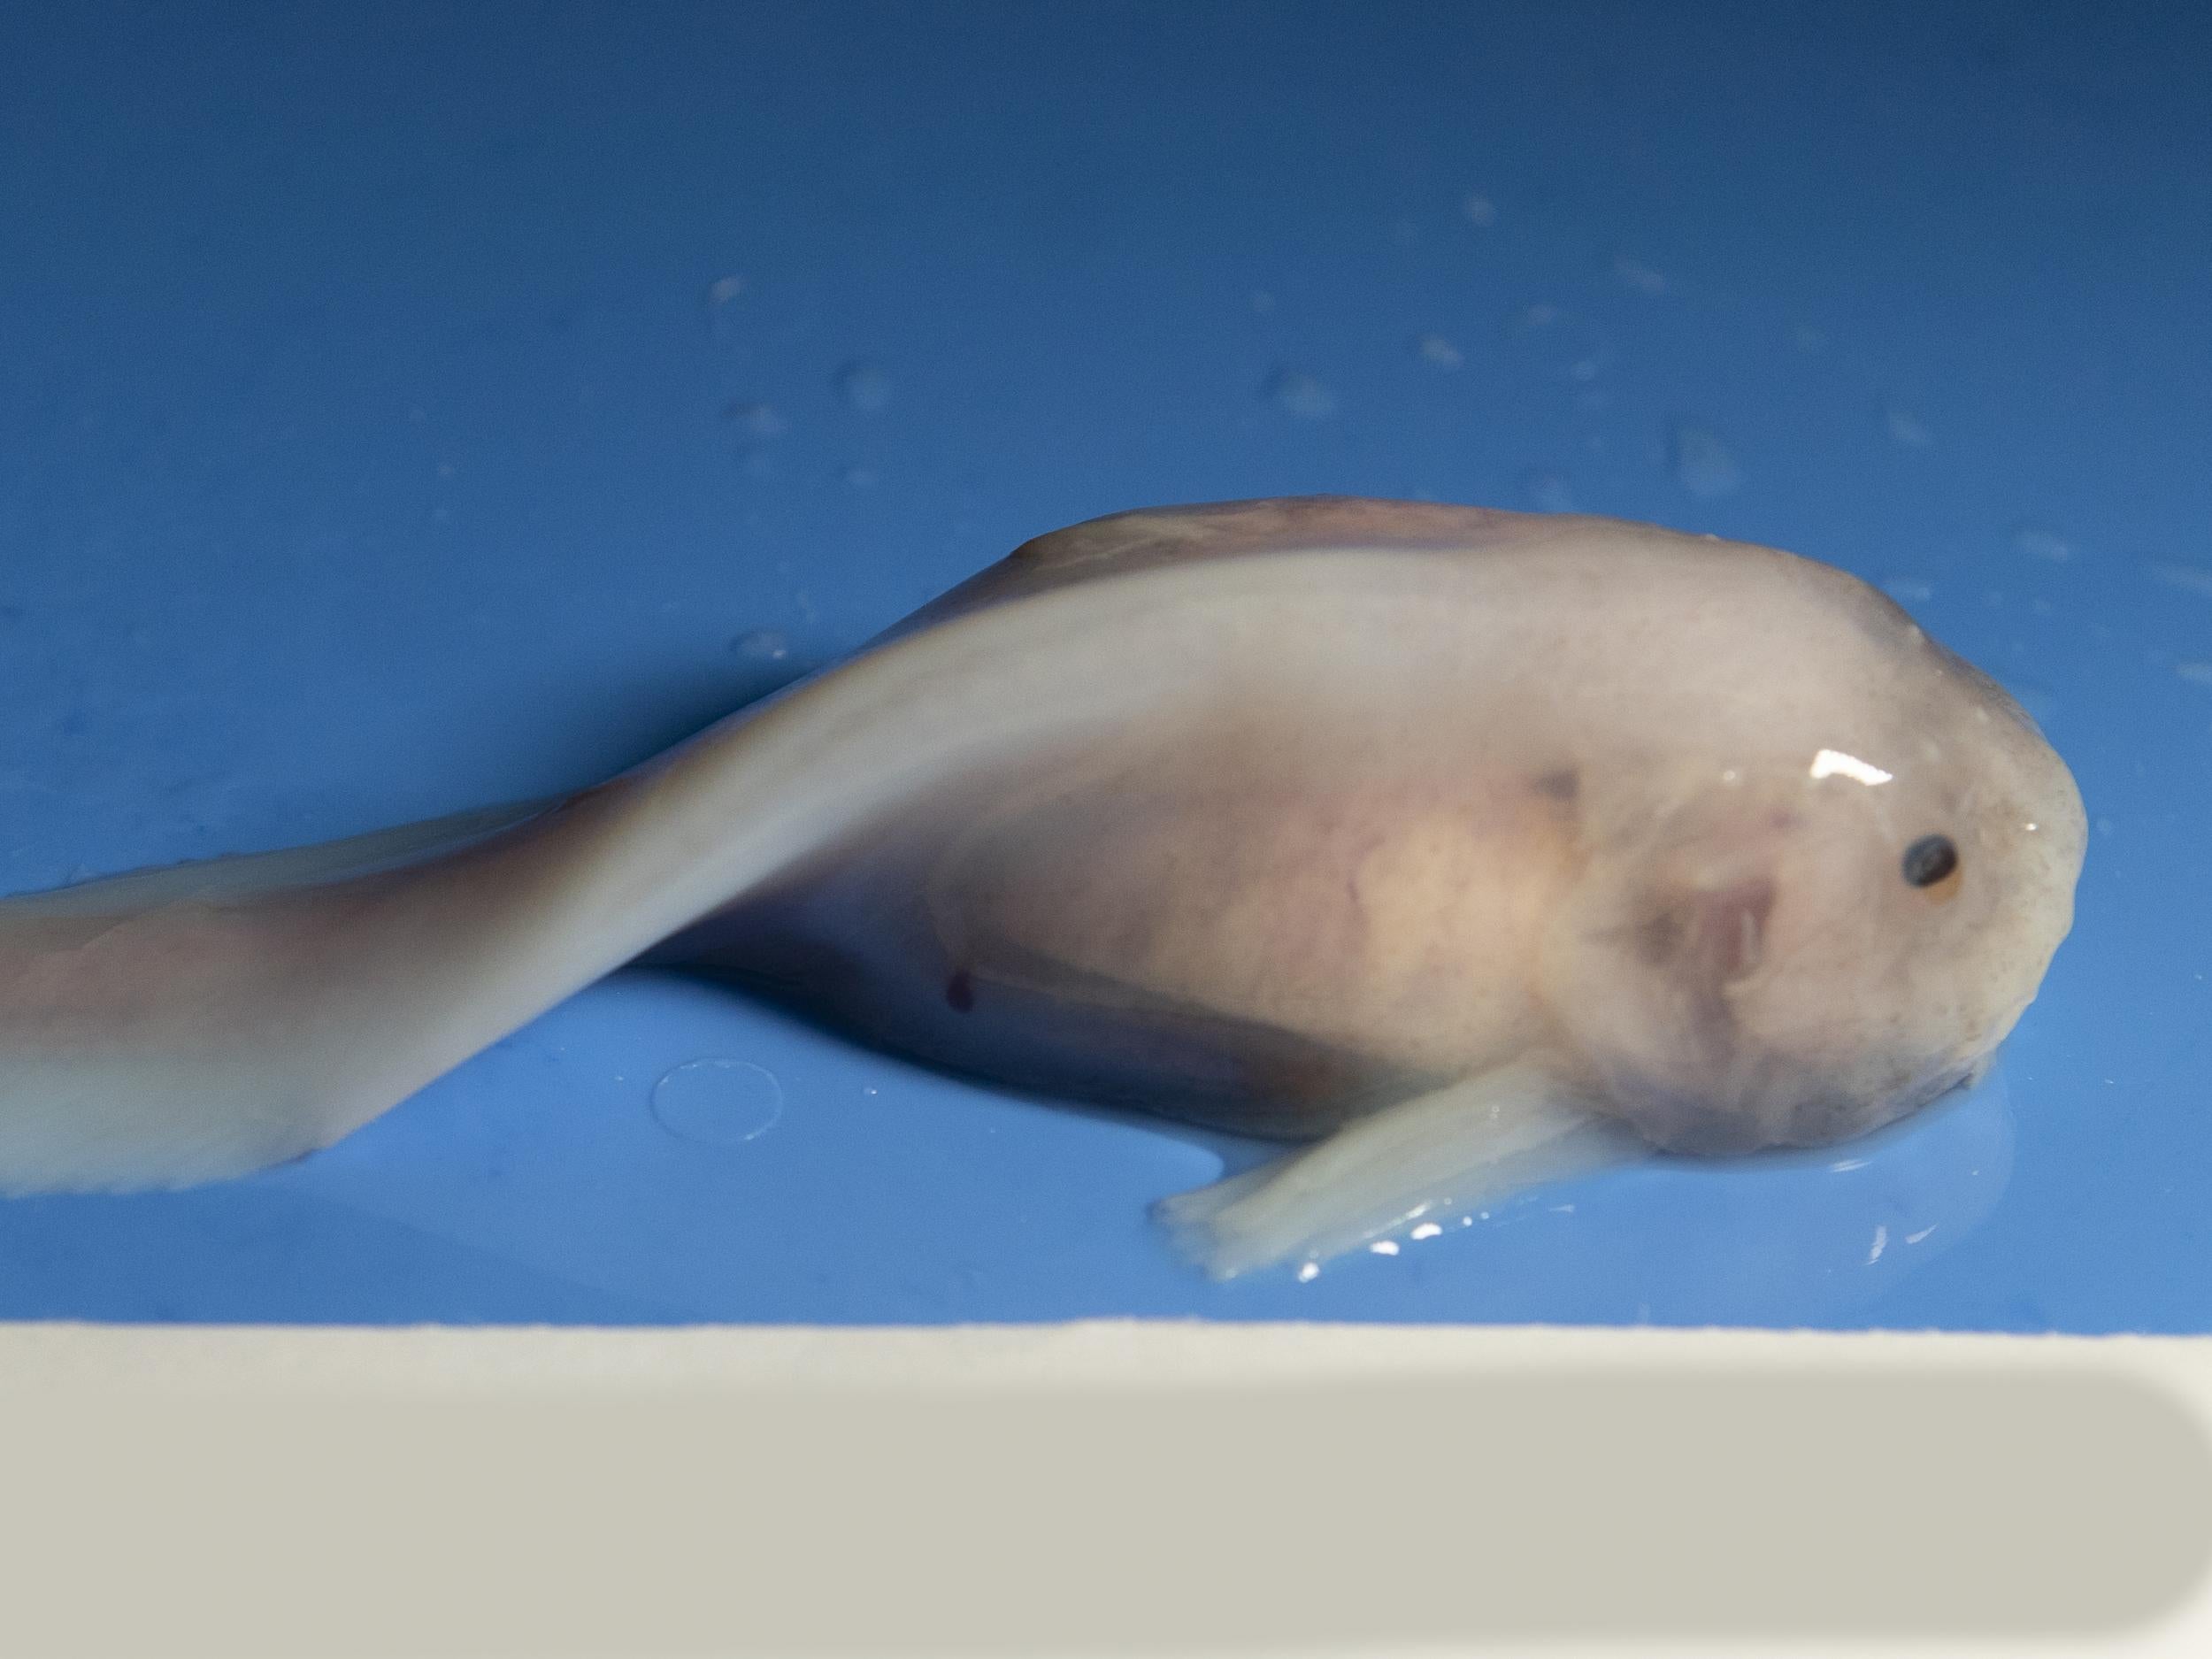 Deep sea snailfish has soft bones and open skull to cope with crushing  pressure, study finds | The Independent | The Independent